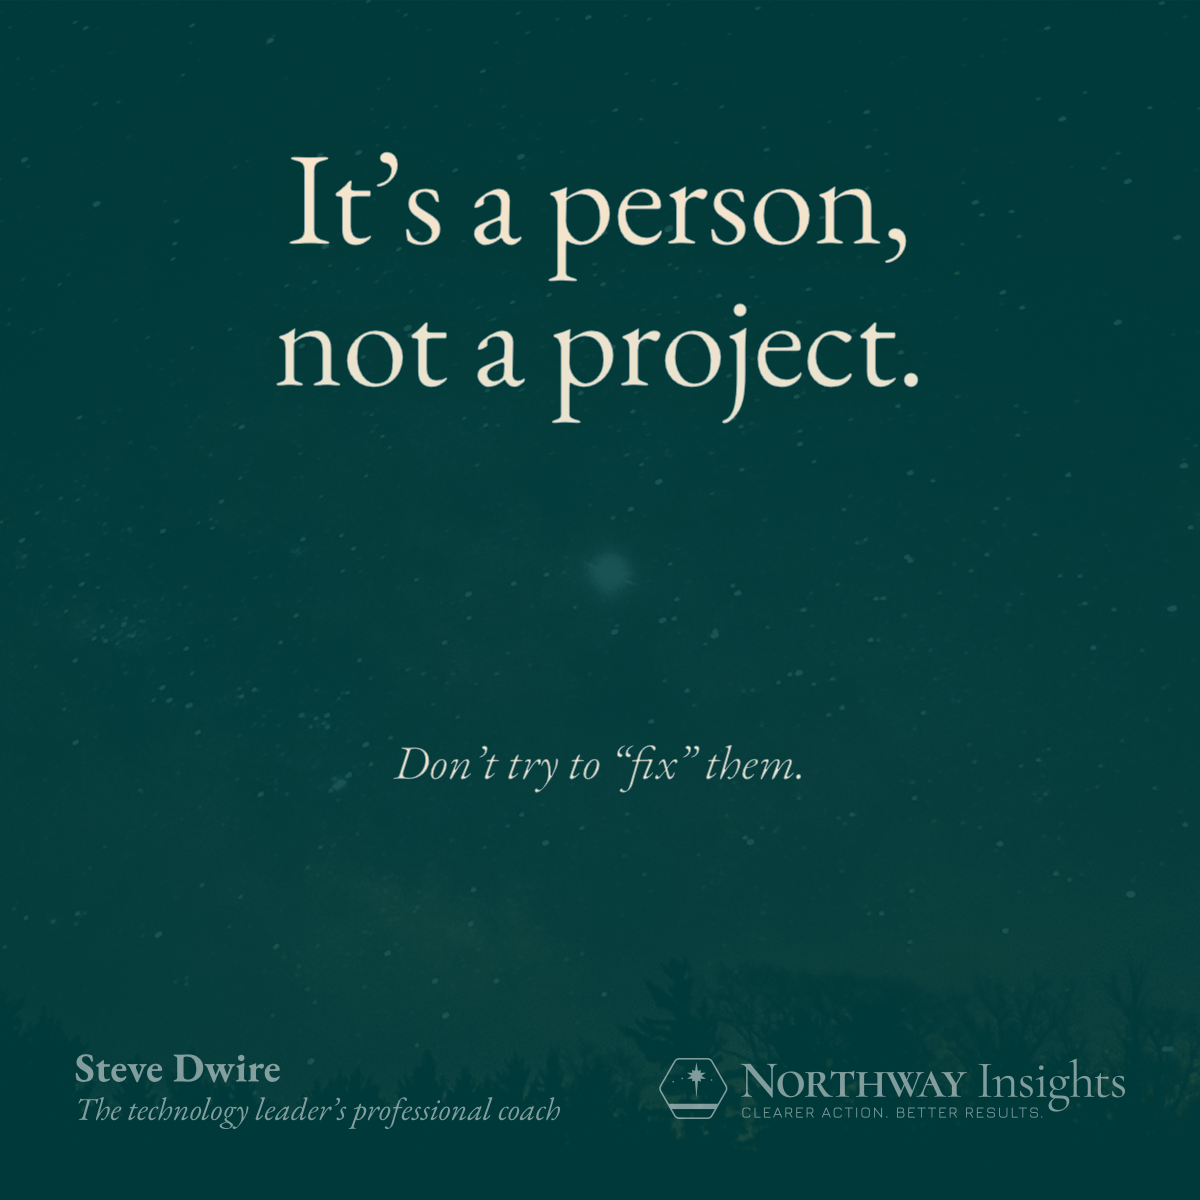 It’s a person, not a project